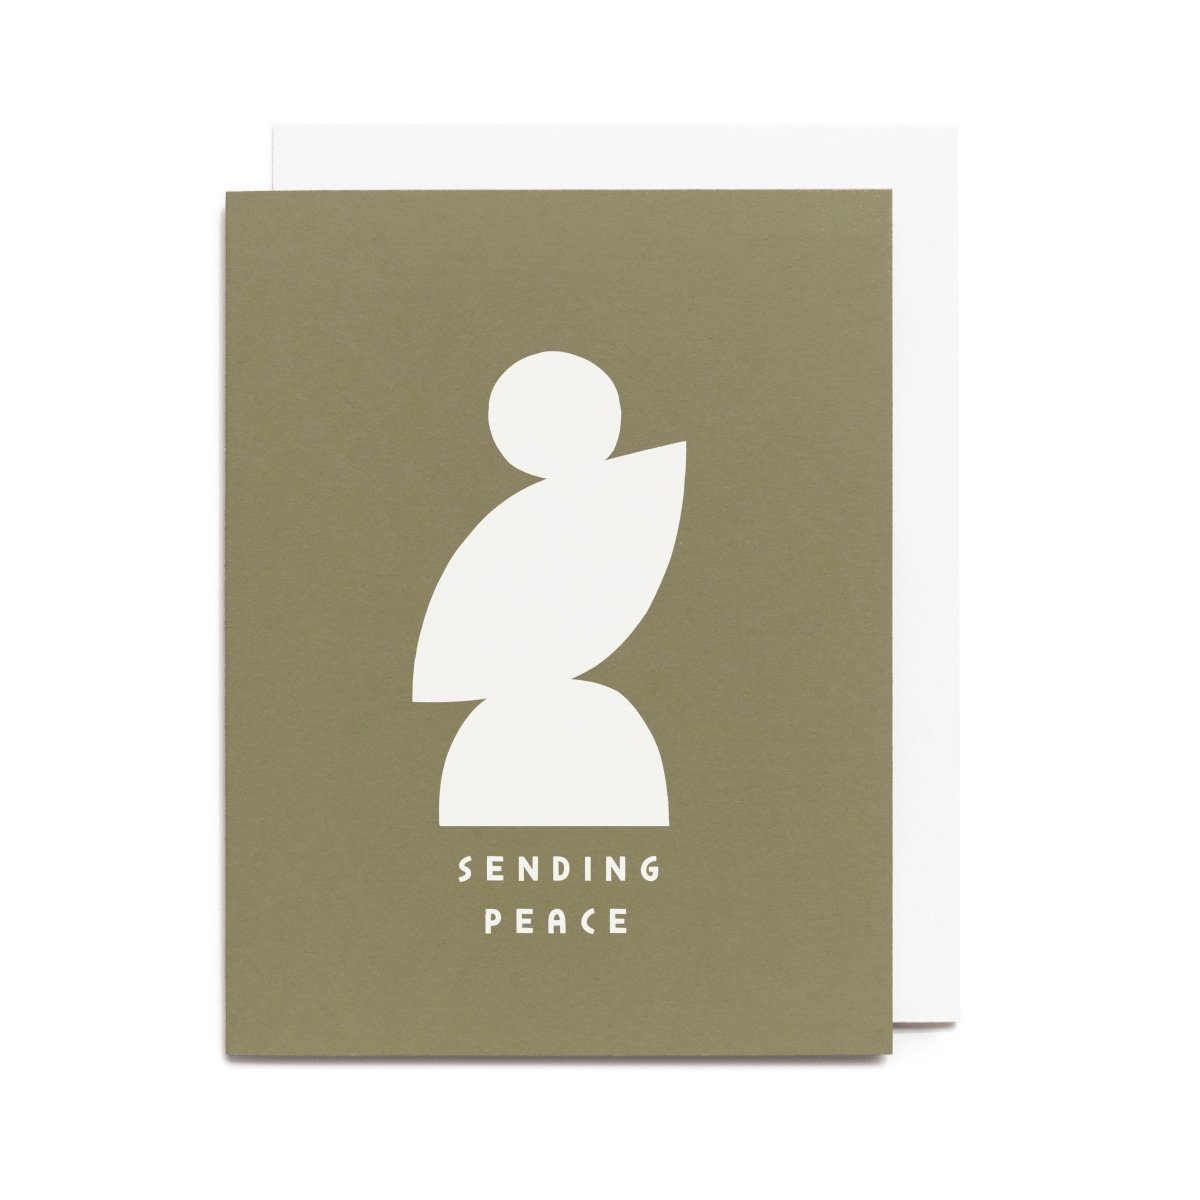 A moss green card with a white abstract illustration. Front of card reads: "SENDING PEACE." Designed and handcrafted by Worthwhile Paper in Ypsilanti, MI.